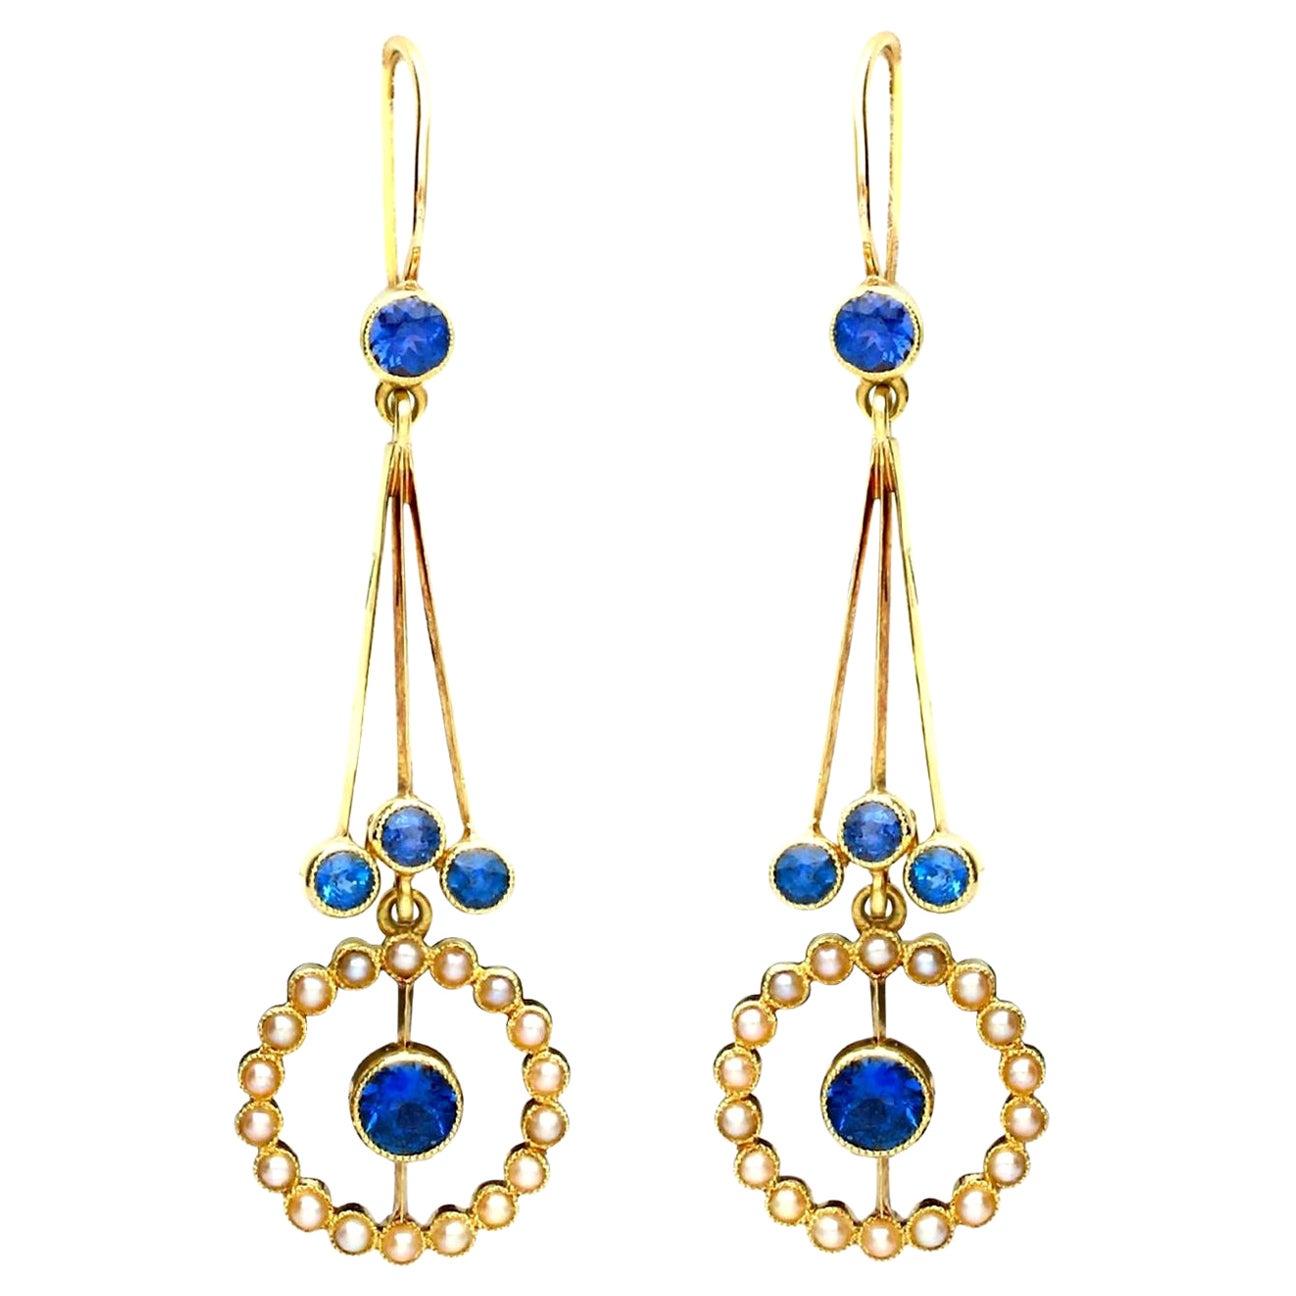 Antique 2.02 Carat Sapphire Seed Pearl Yellow Gold Drop Earrings, circa 1910 For Sale